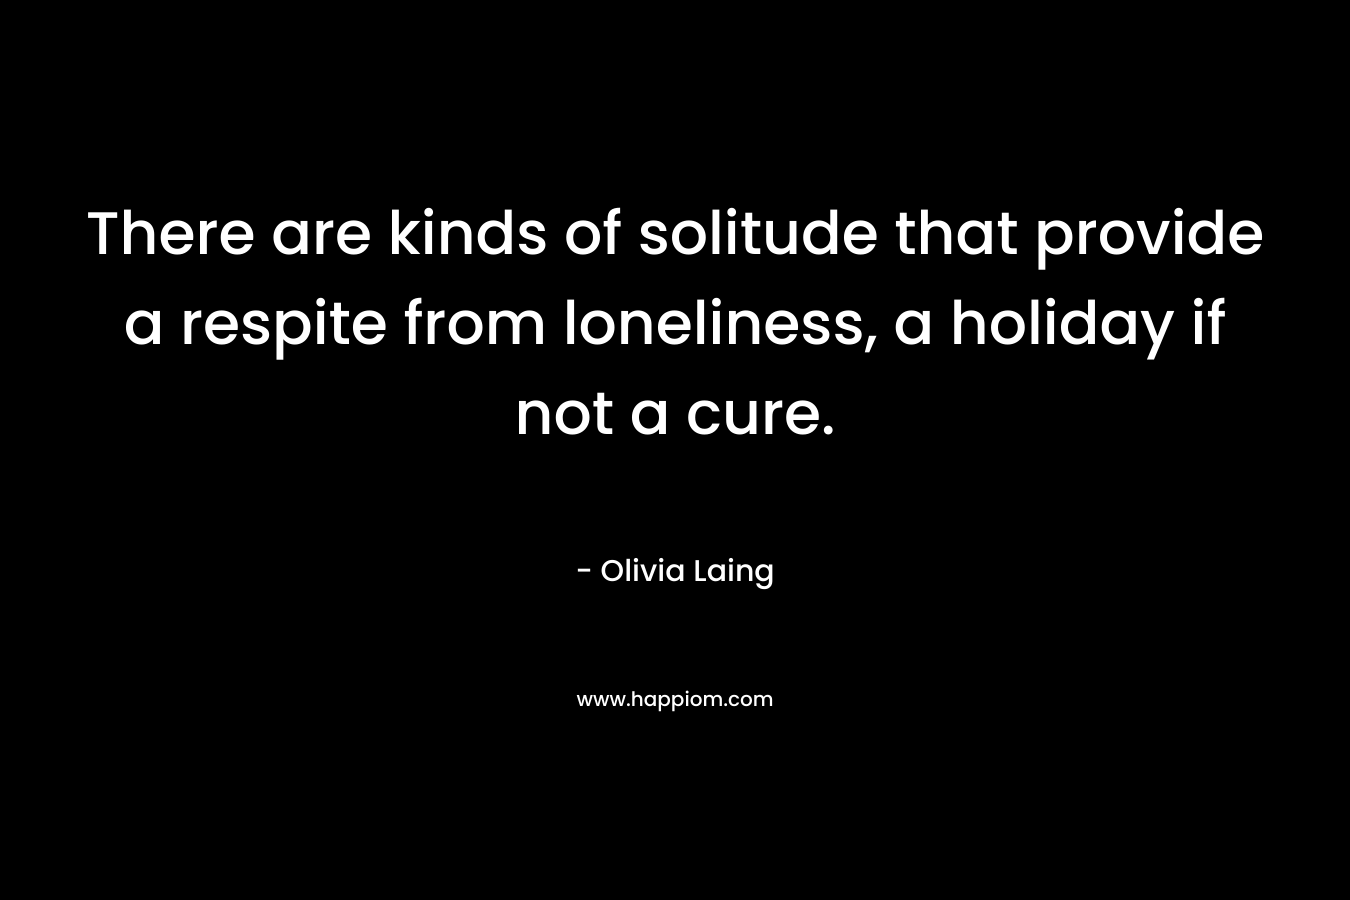 There are kinds of solitude that provide a respite from loneliness, a holiday if not a cure.